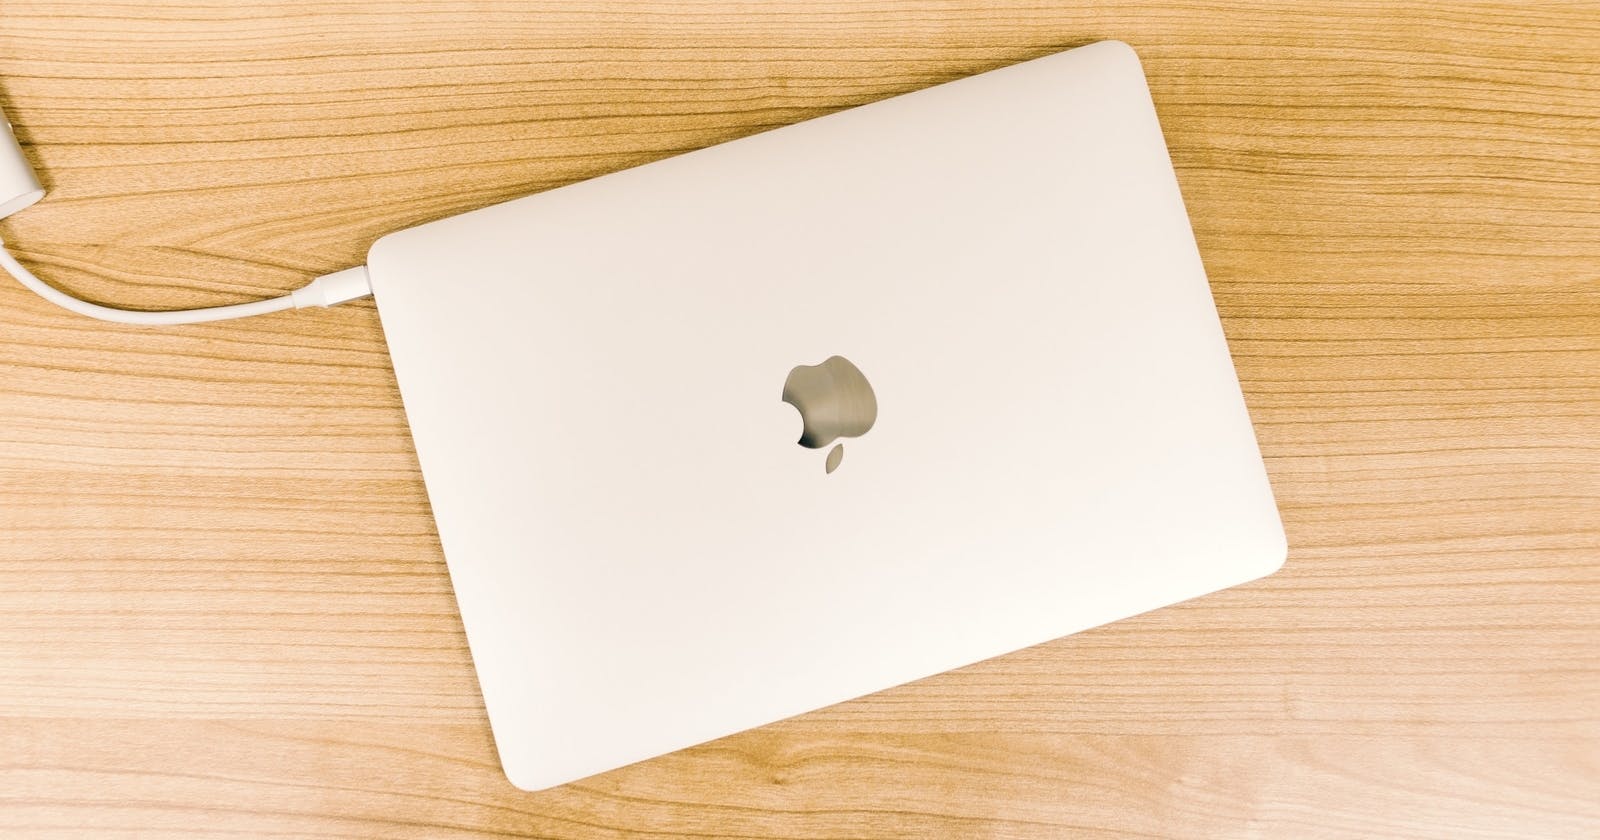 Protect the data on your MacBook against theft and loss.